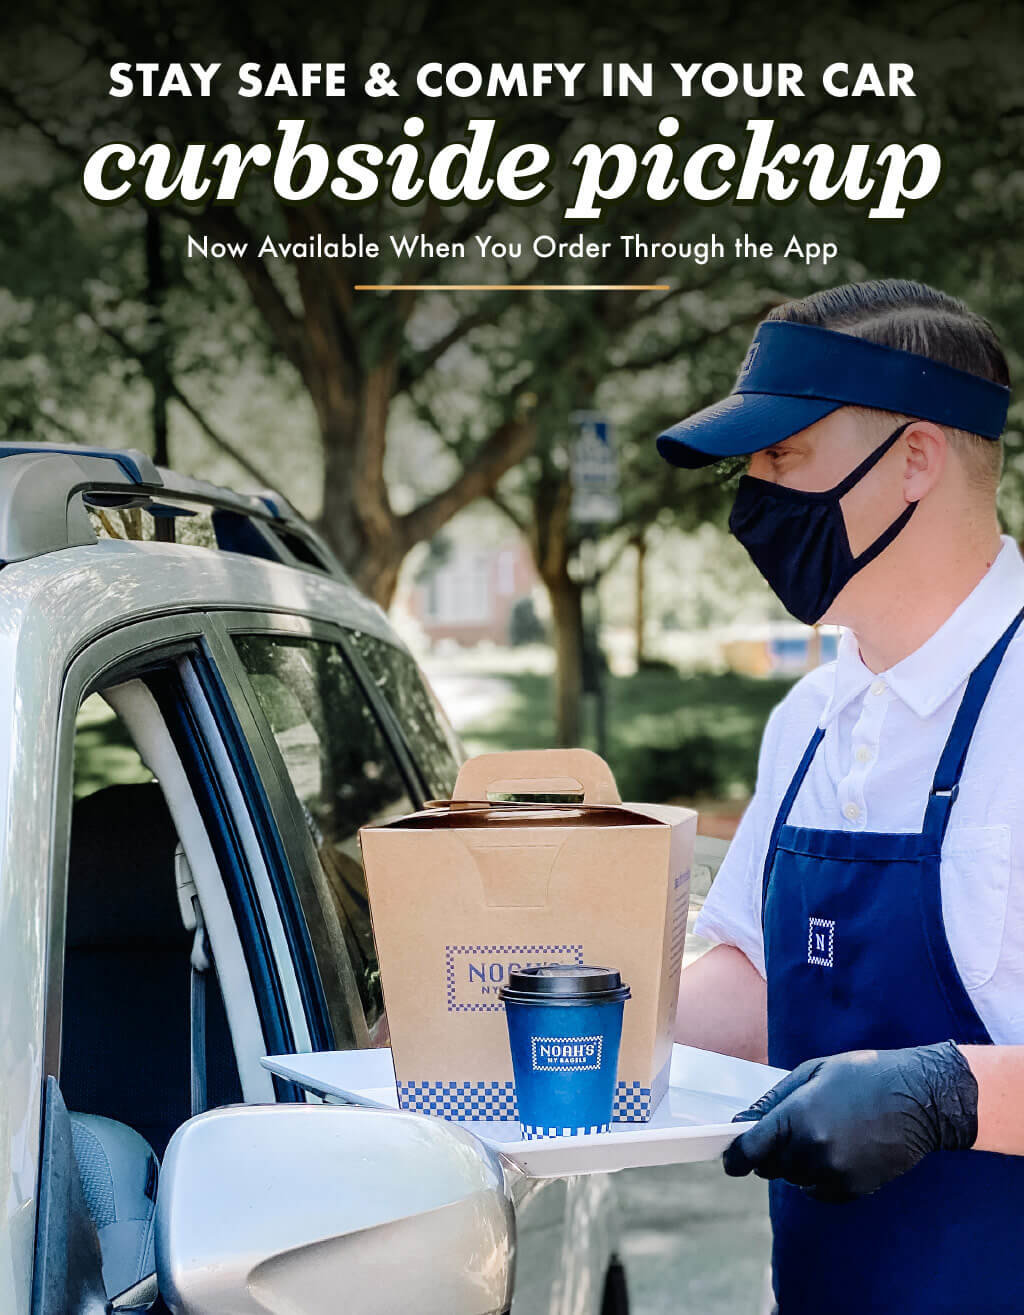 ROTATING SLIDER: Curbside Pickup available when you order through the app.